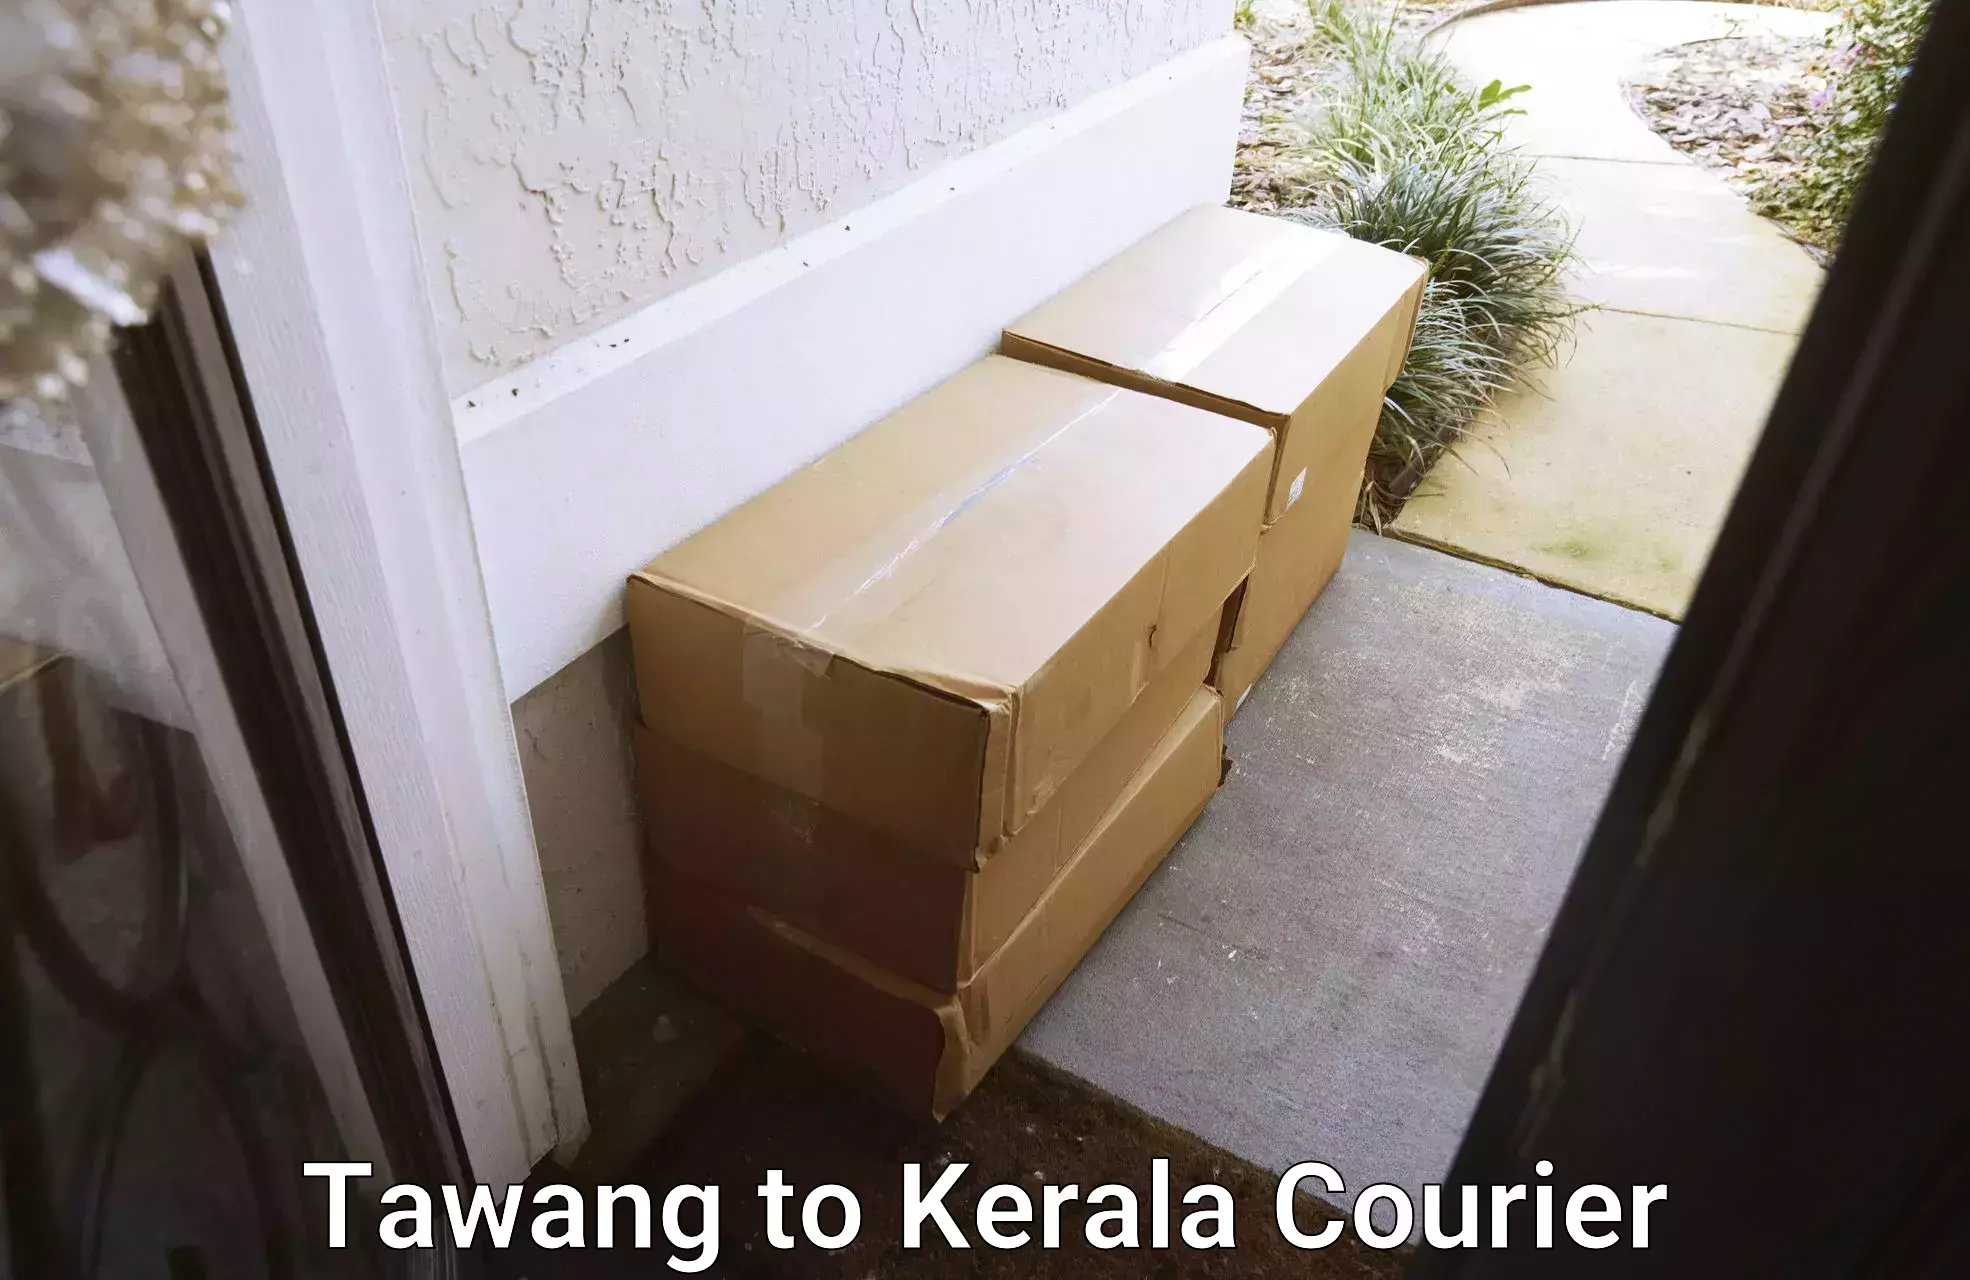 State-of-the-art courier technology Tawang to Kottayam